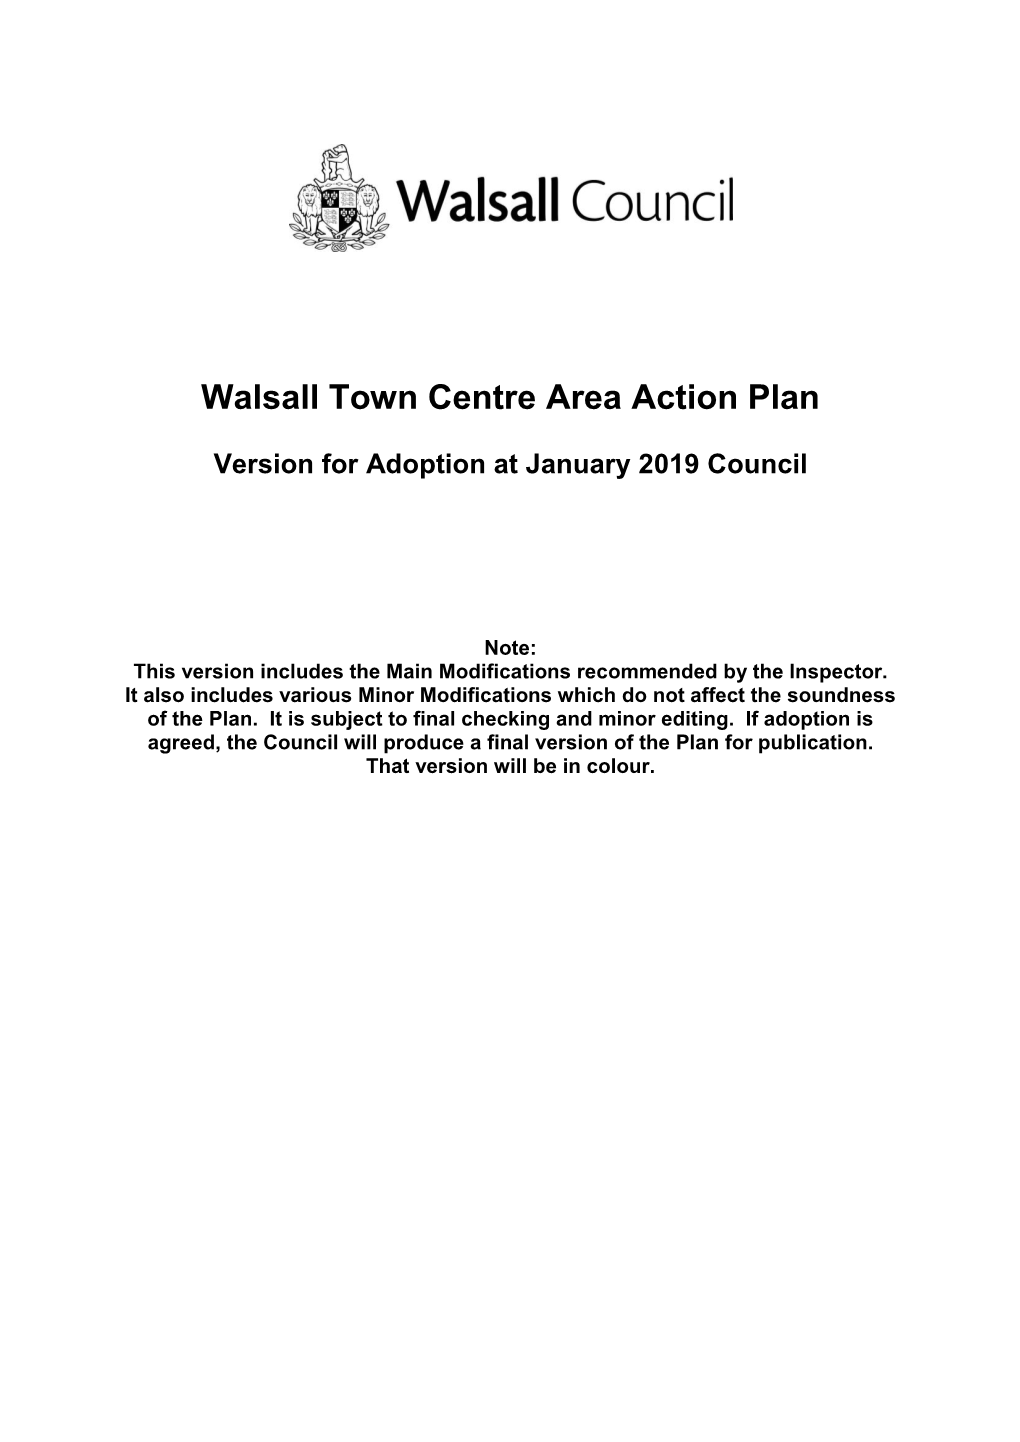 Walsall Town Centre Area Action Plan